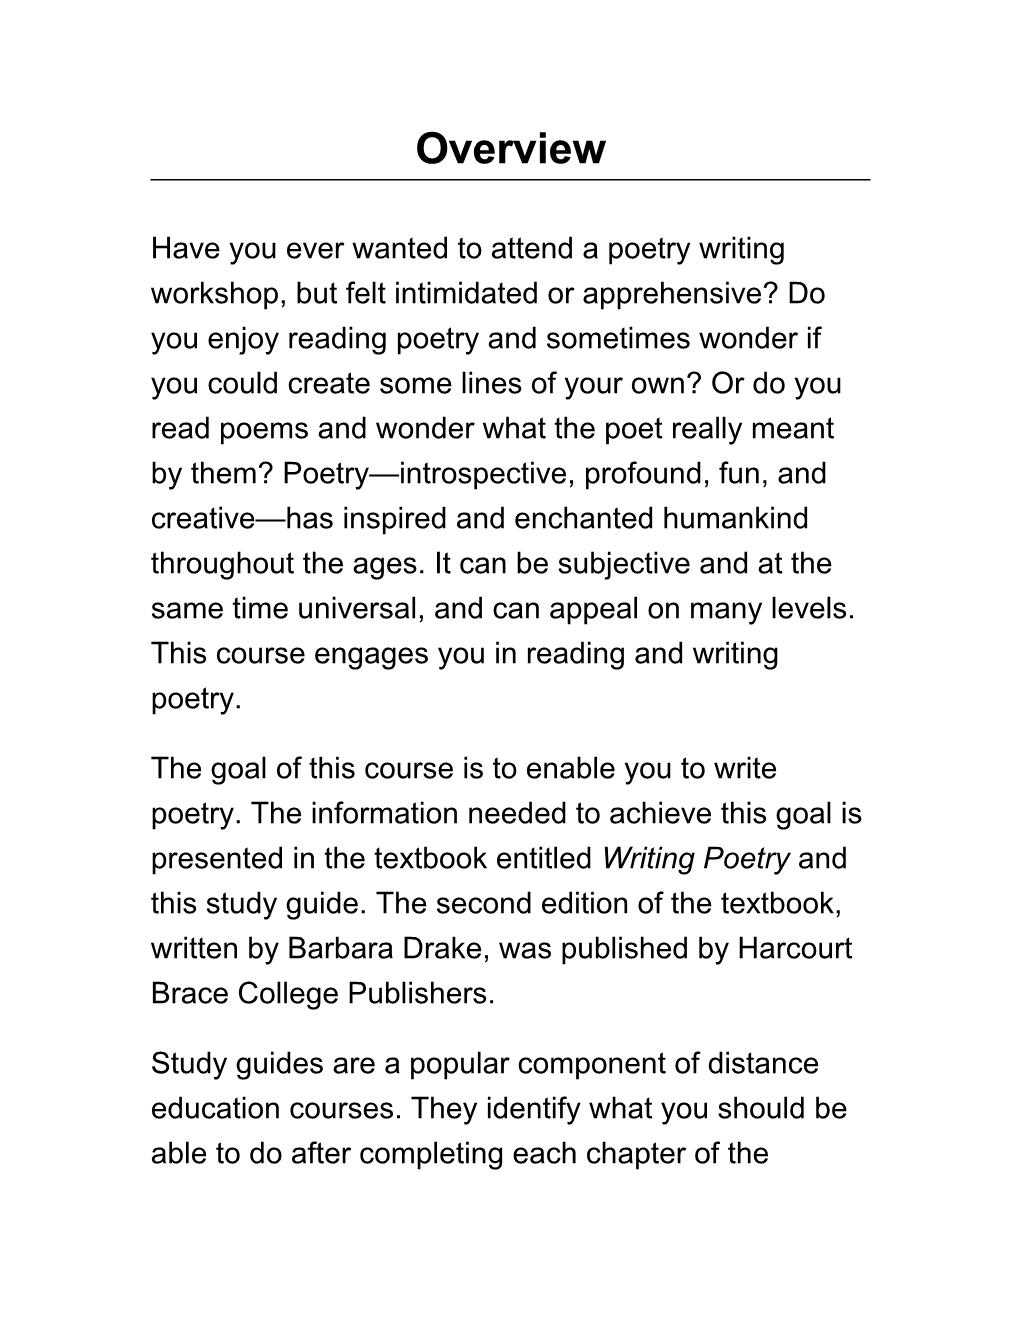 Have You Ever Wanted to Attend a Poetry Writing Workshop, but Felt Intimidated Or Apprehensive?